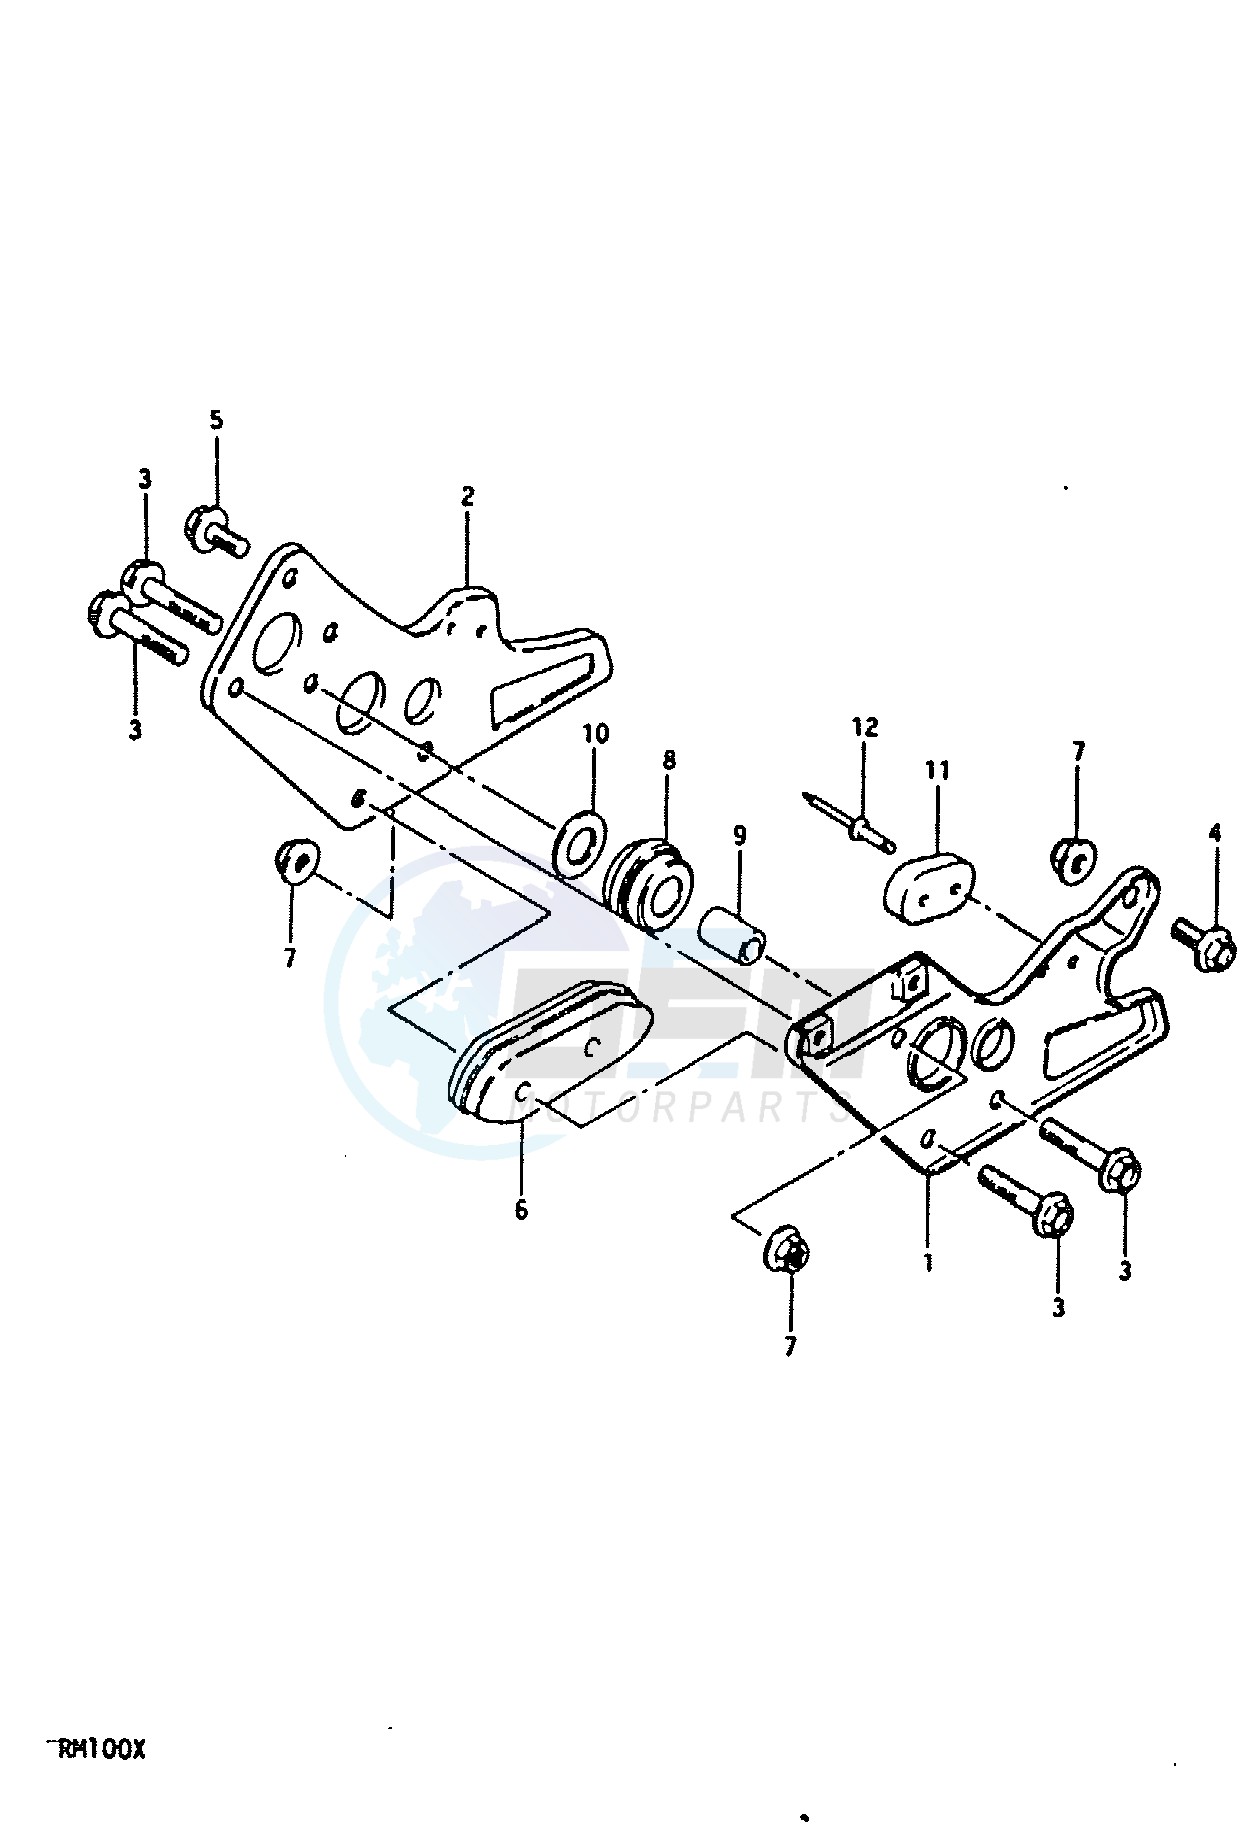 CHAIN GUIDE (RM100X) image